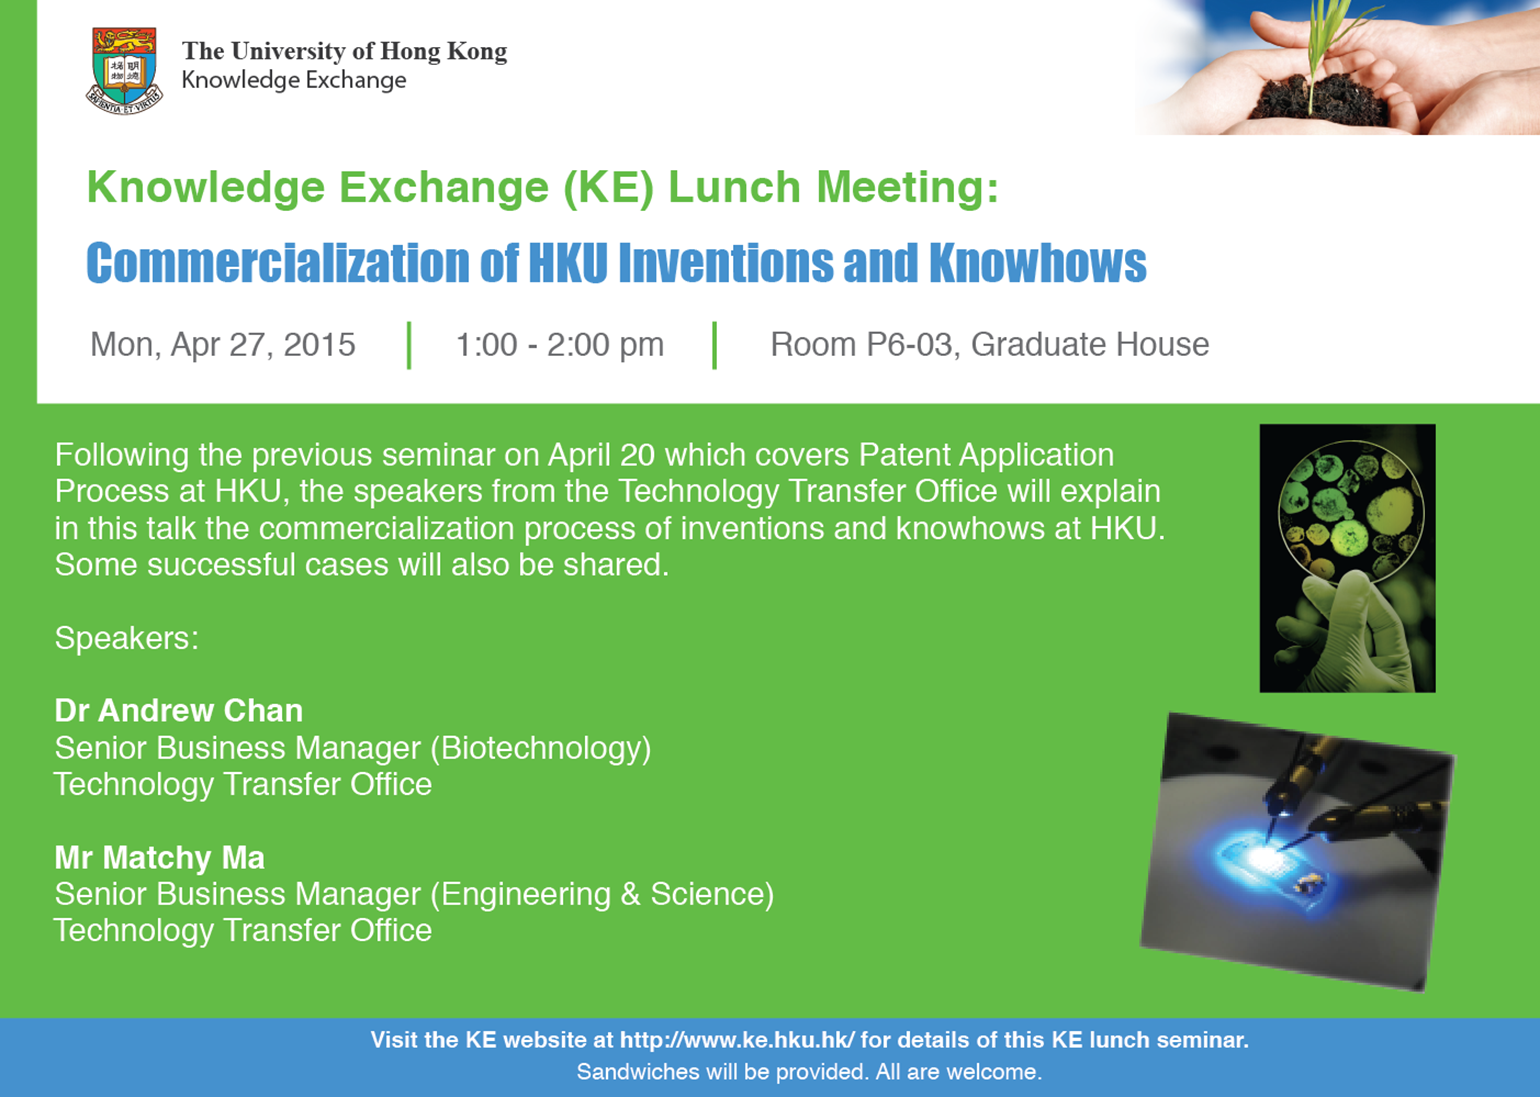 KE lunch meeting - Commercialization of HKU Inventions and Knowhows